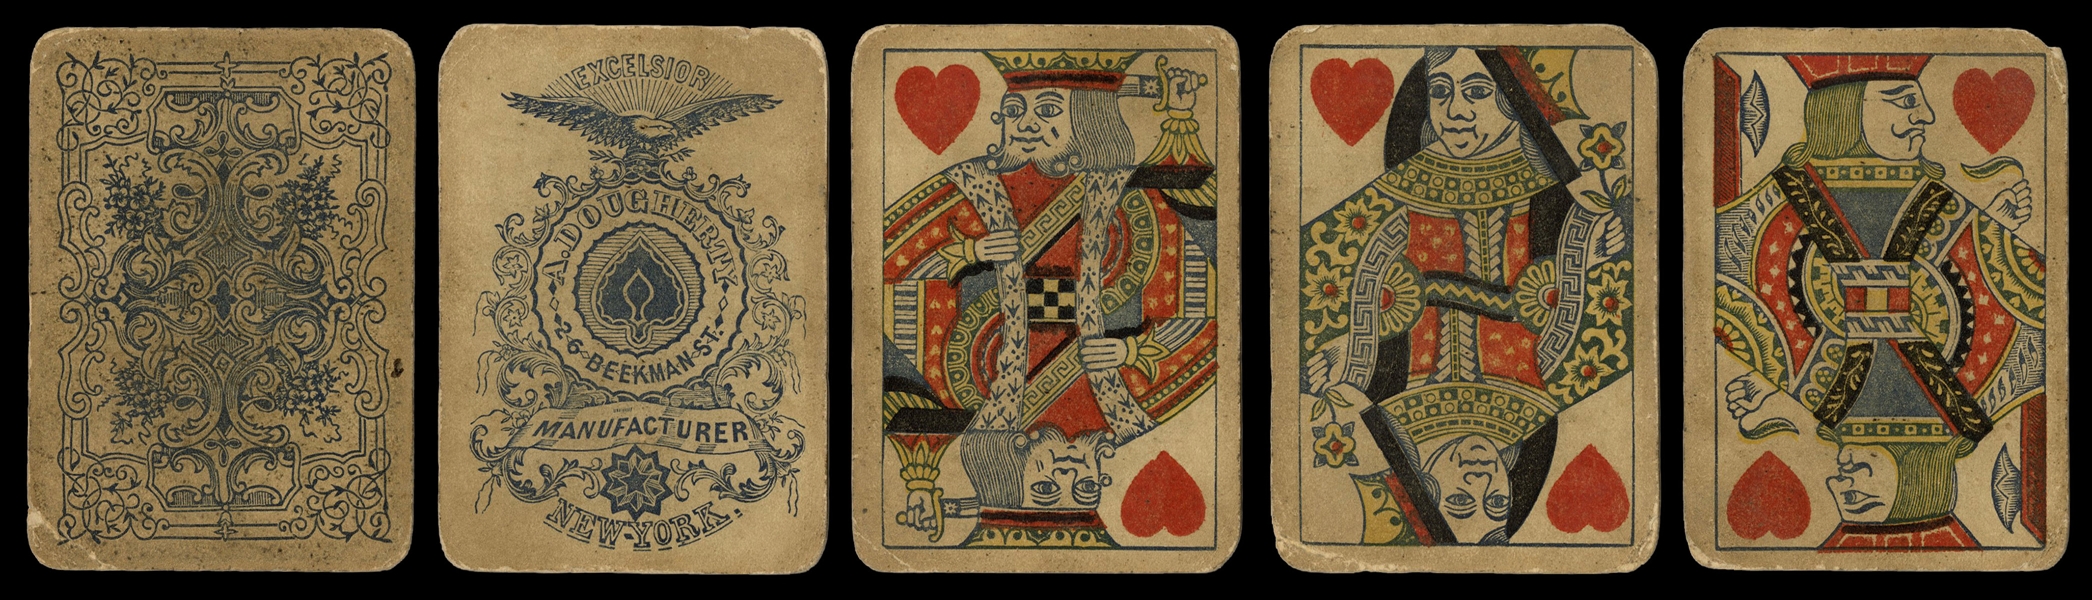  Dougherty Excelsior Playing Cards. New York: Andrew Dougher...